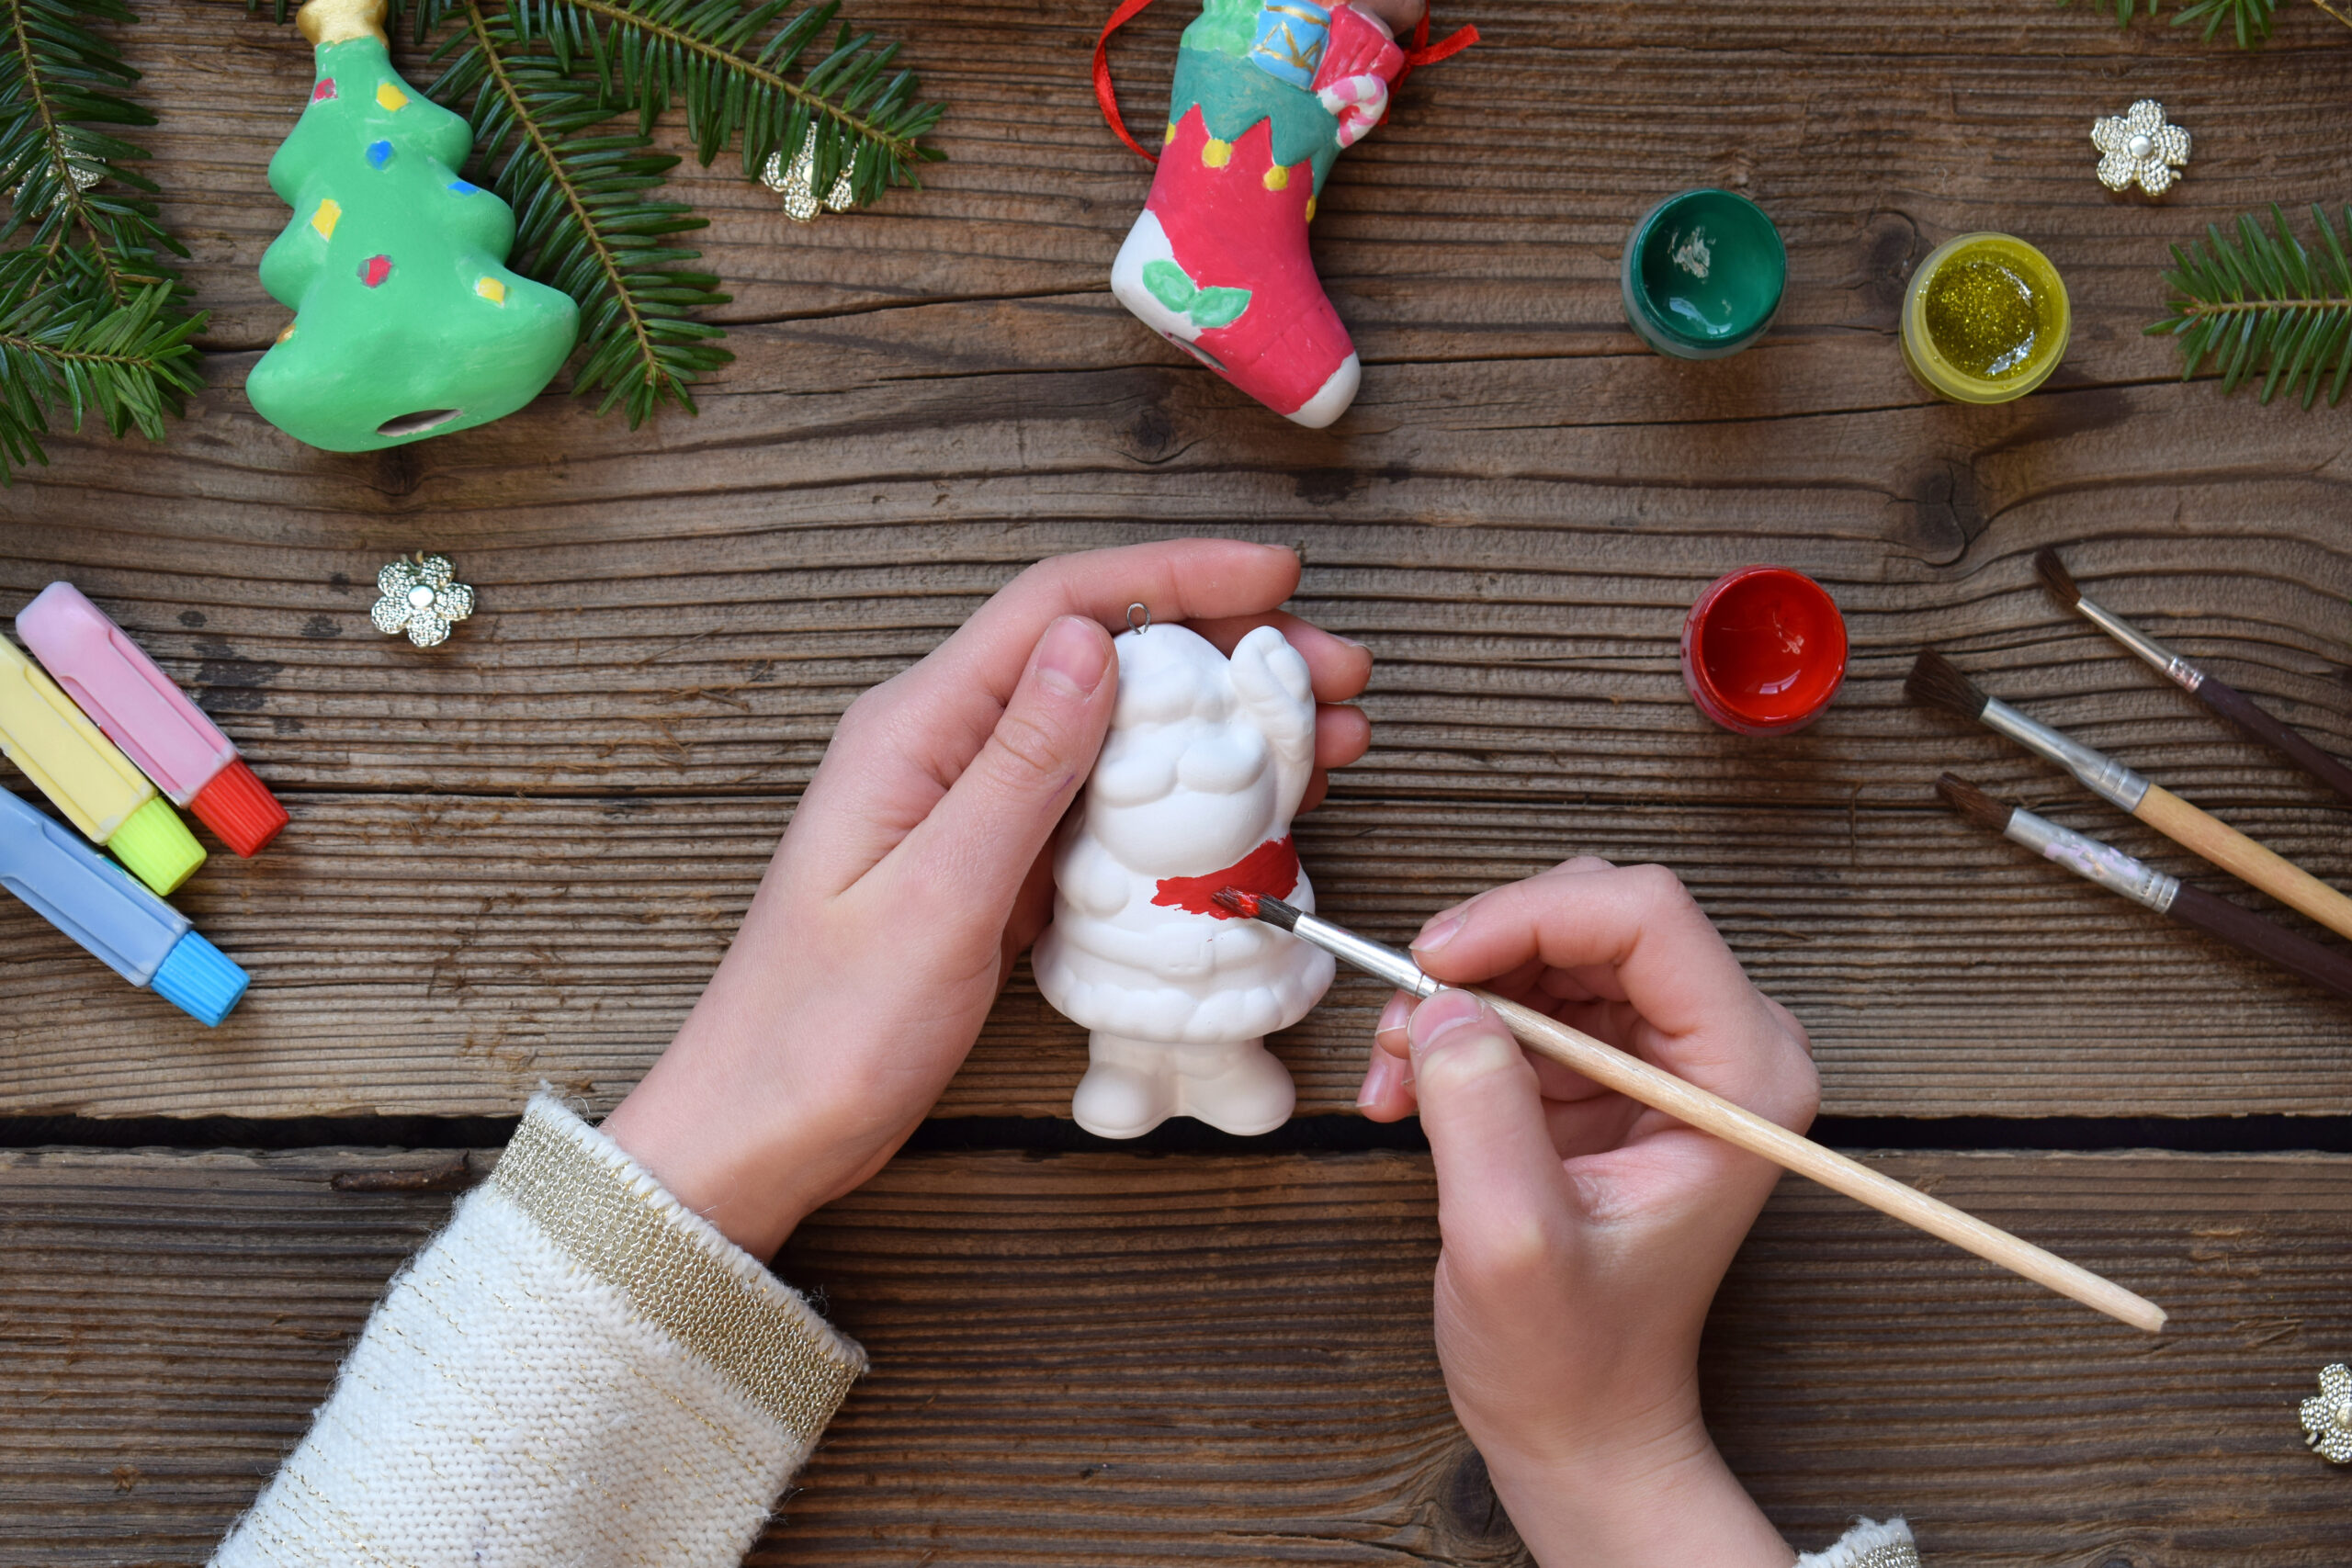 Painting Christmas toys from porcelain for decorations. Making clay toy with your own hands. Children's DIY concept. Handmade crafts on holiday. Master class of art.